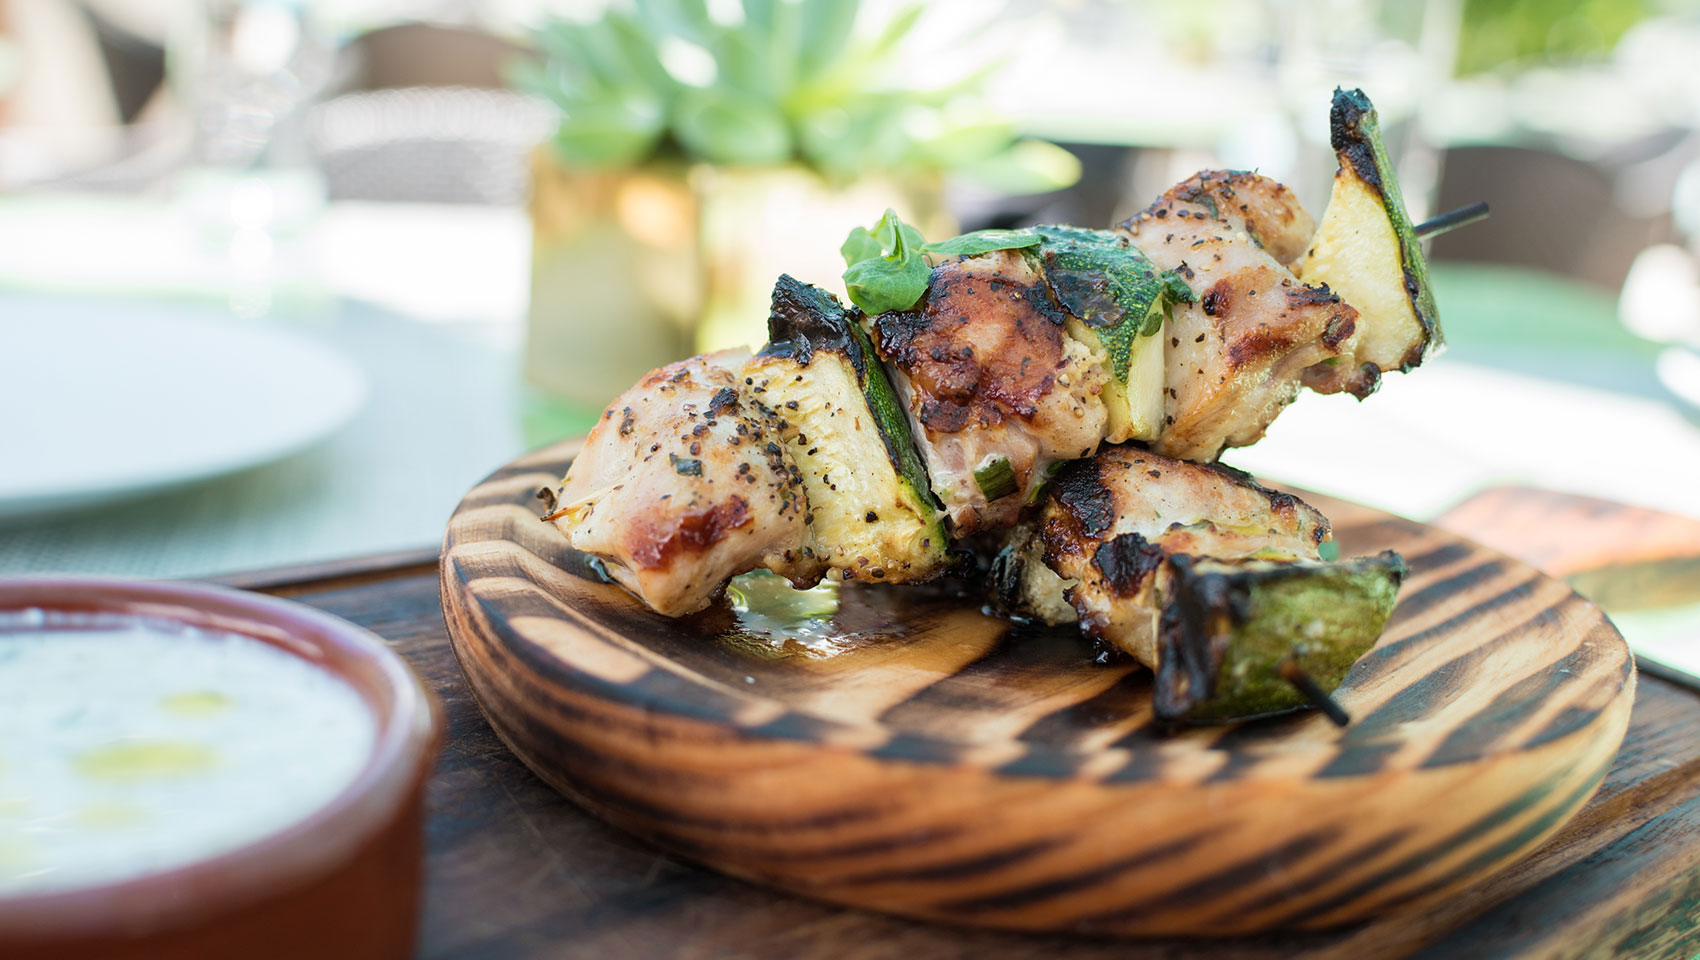 chicken-shish-kebab-with-tzaziki-dip-and-grilled-zucchini-photo-credit-adorned-photography